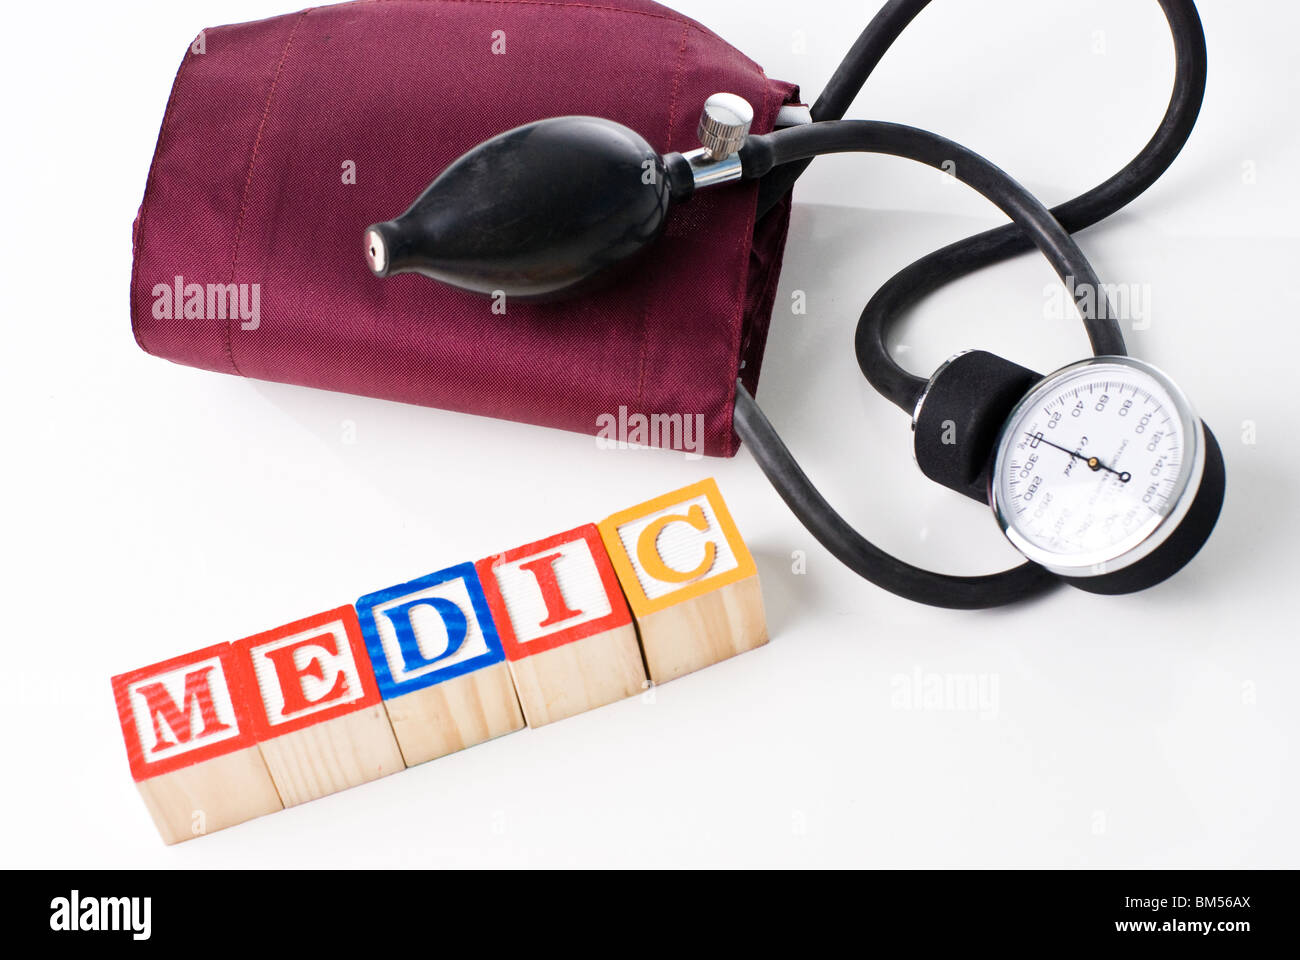 Colorful children's blocks spelling MEDIC with a blood pressure cuff Stock Photo